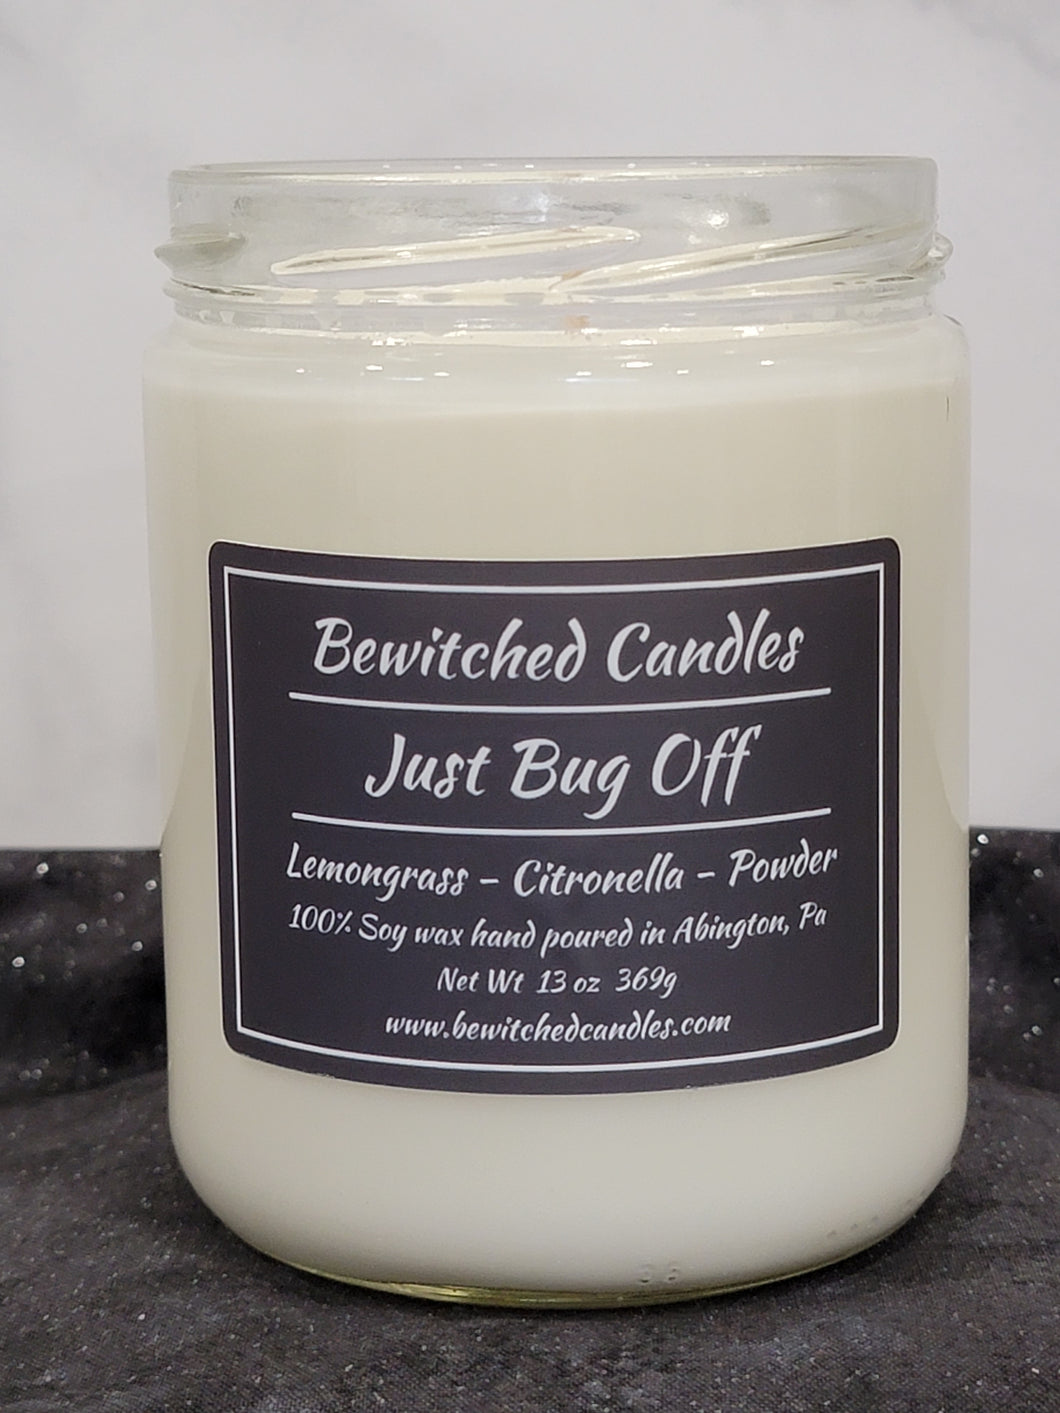 100% Soy wax candle hand poured in our USA made glass jars using premium fragrance oils cotton wicks with hints of Lemon Peel, Camphor, Lemon Grass, Powder